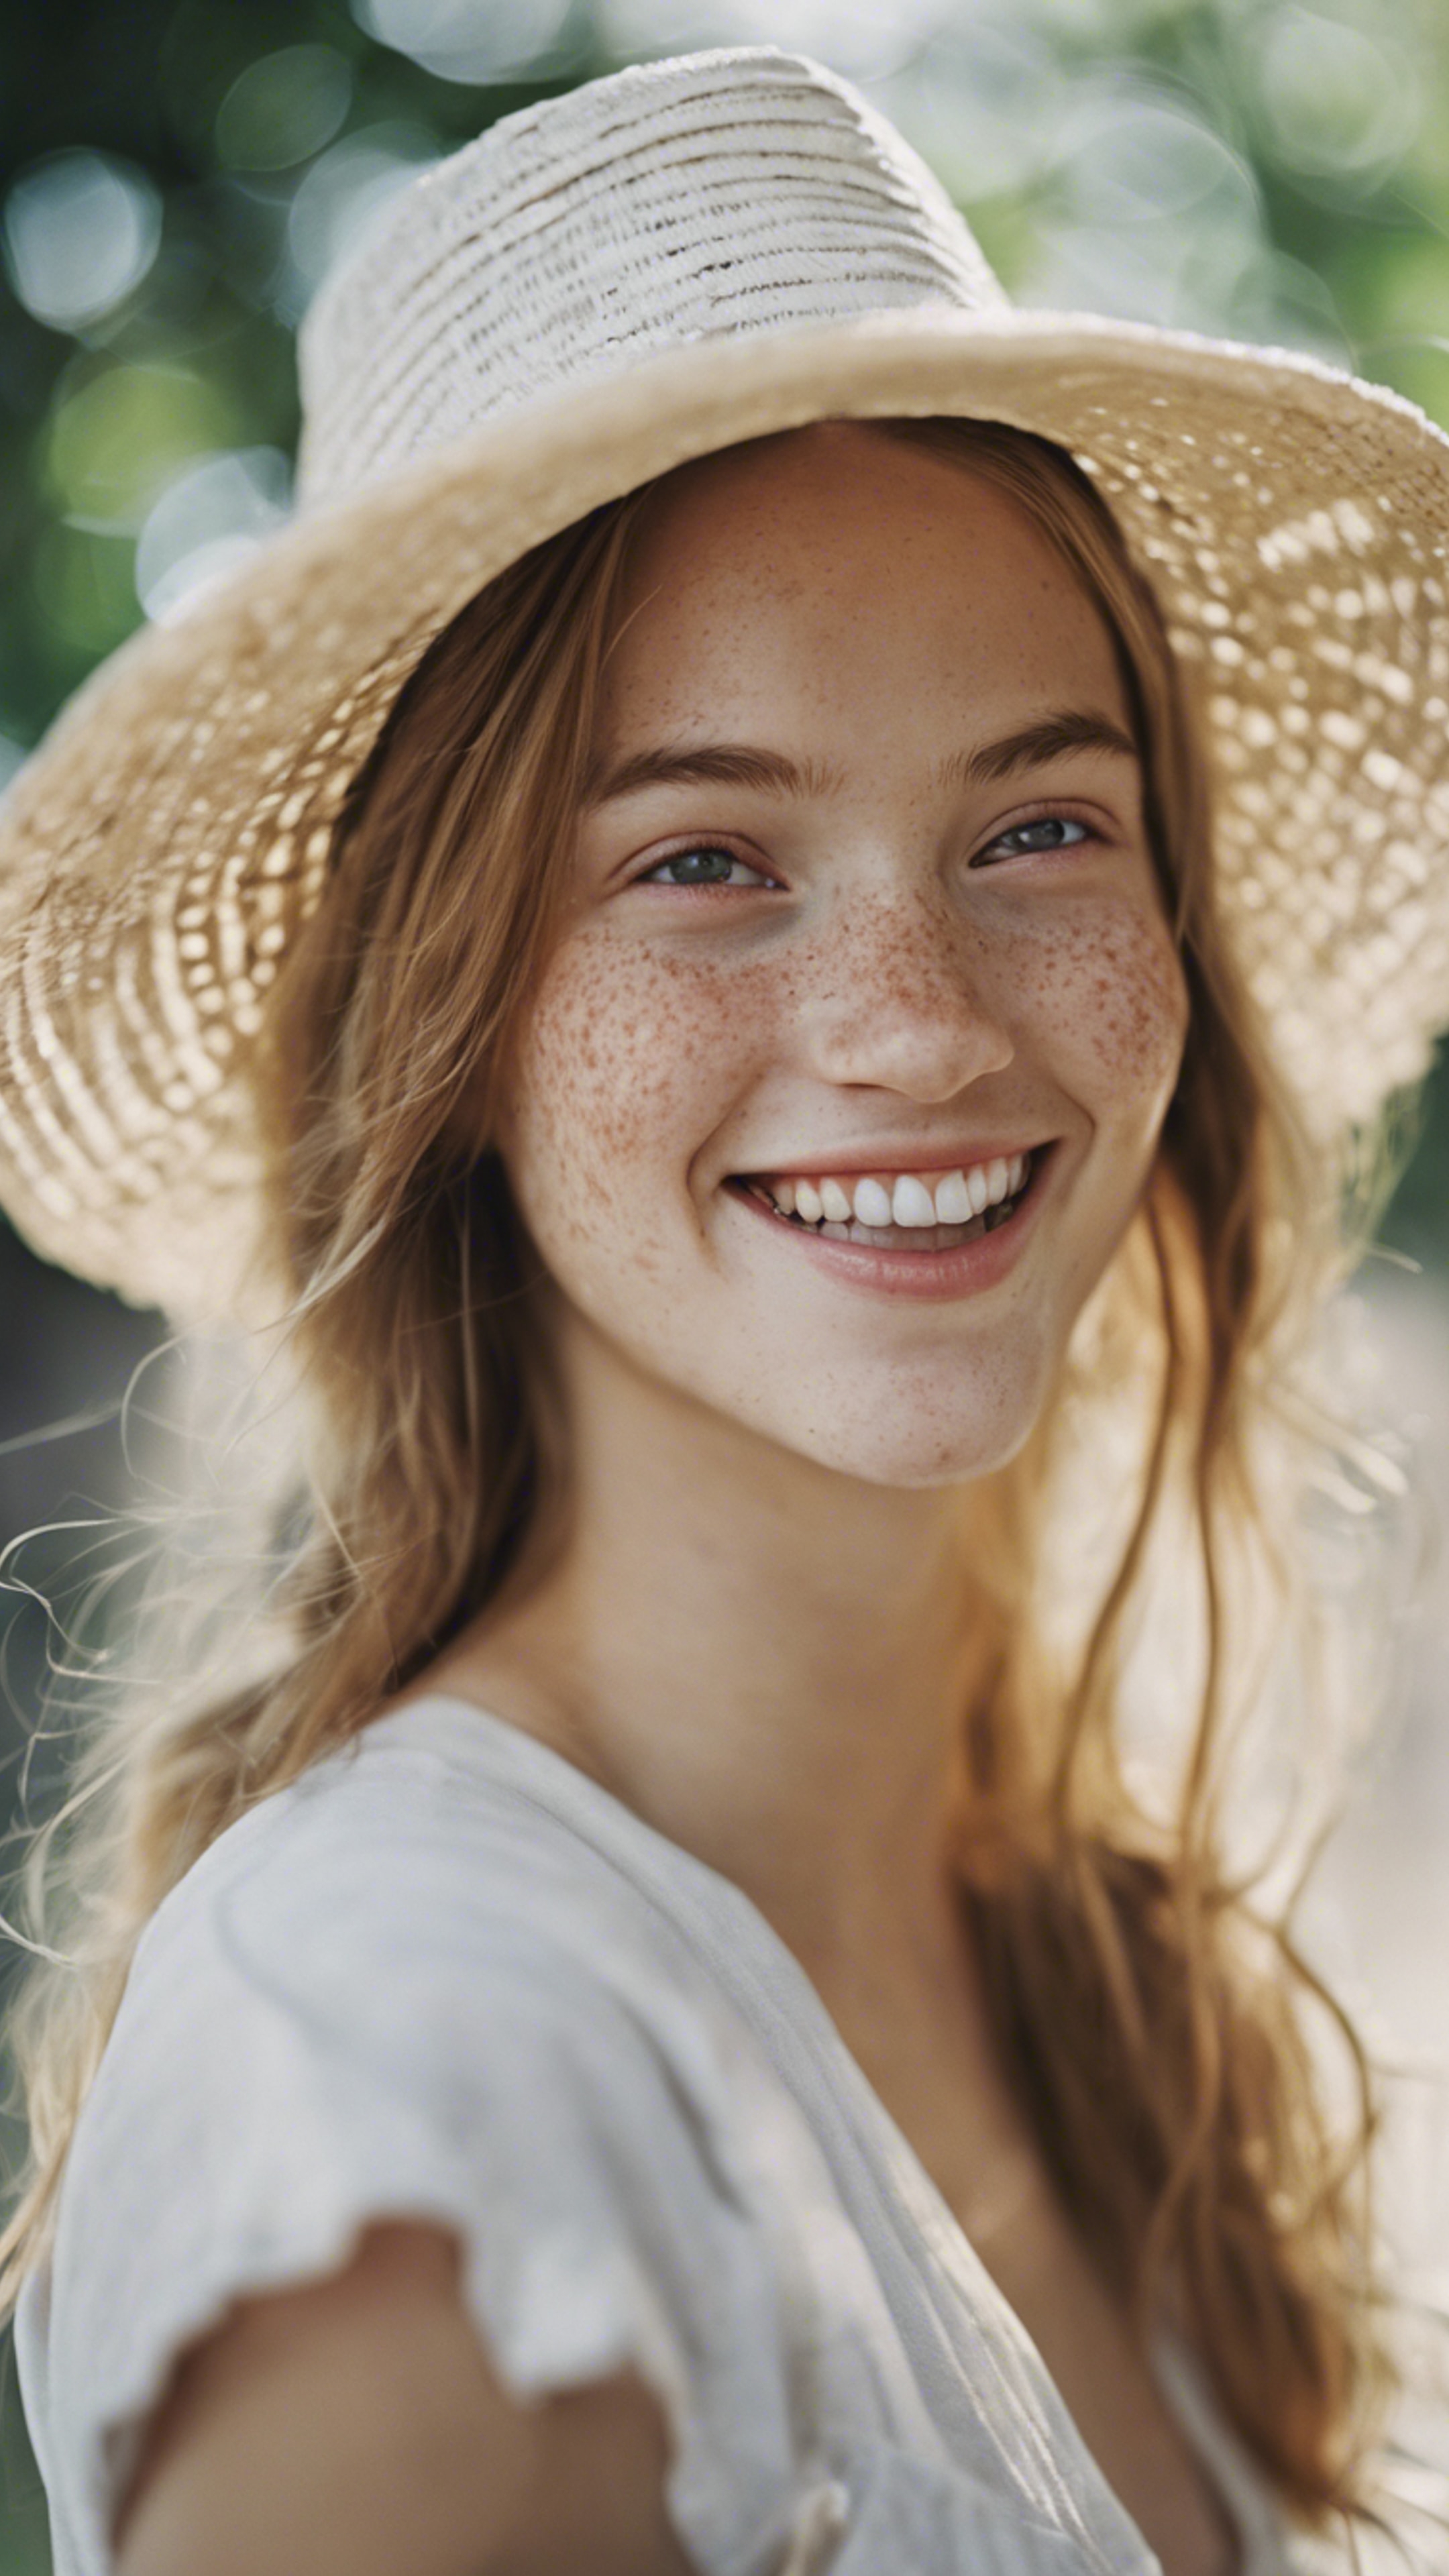 A portrait of a cute girl with freckles and a big smile, wearing a white straw hat. Hintergrund[344e43c9fe594ea98e55]